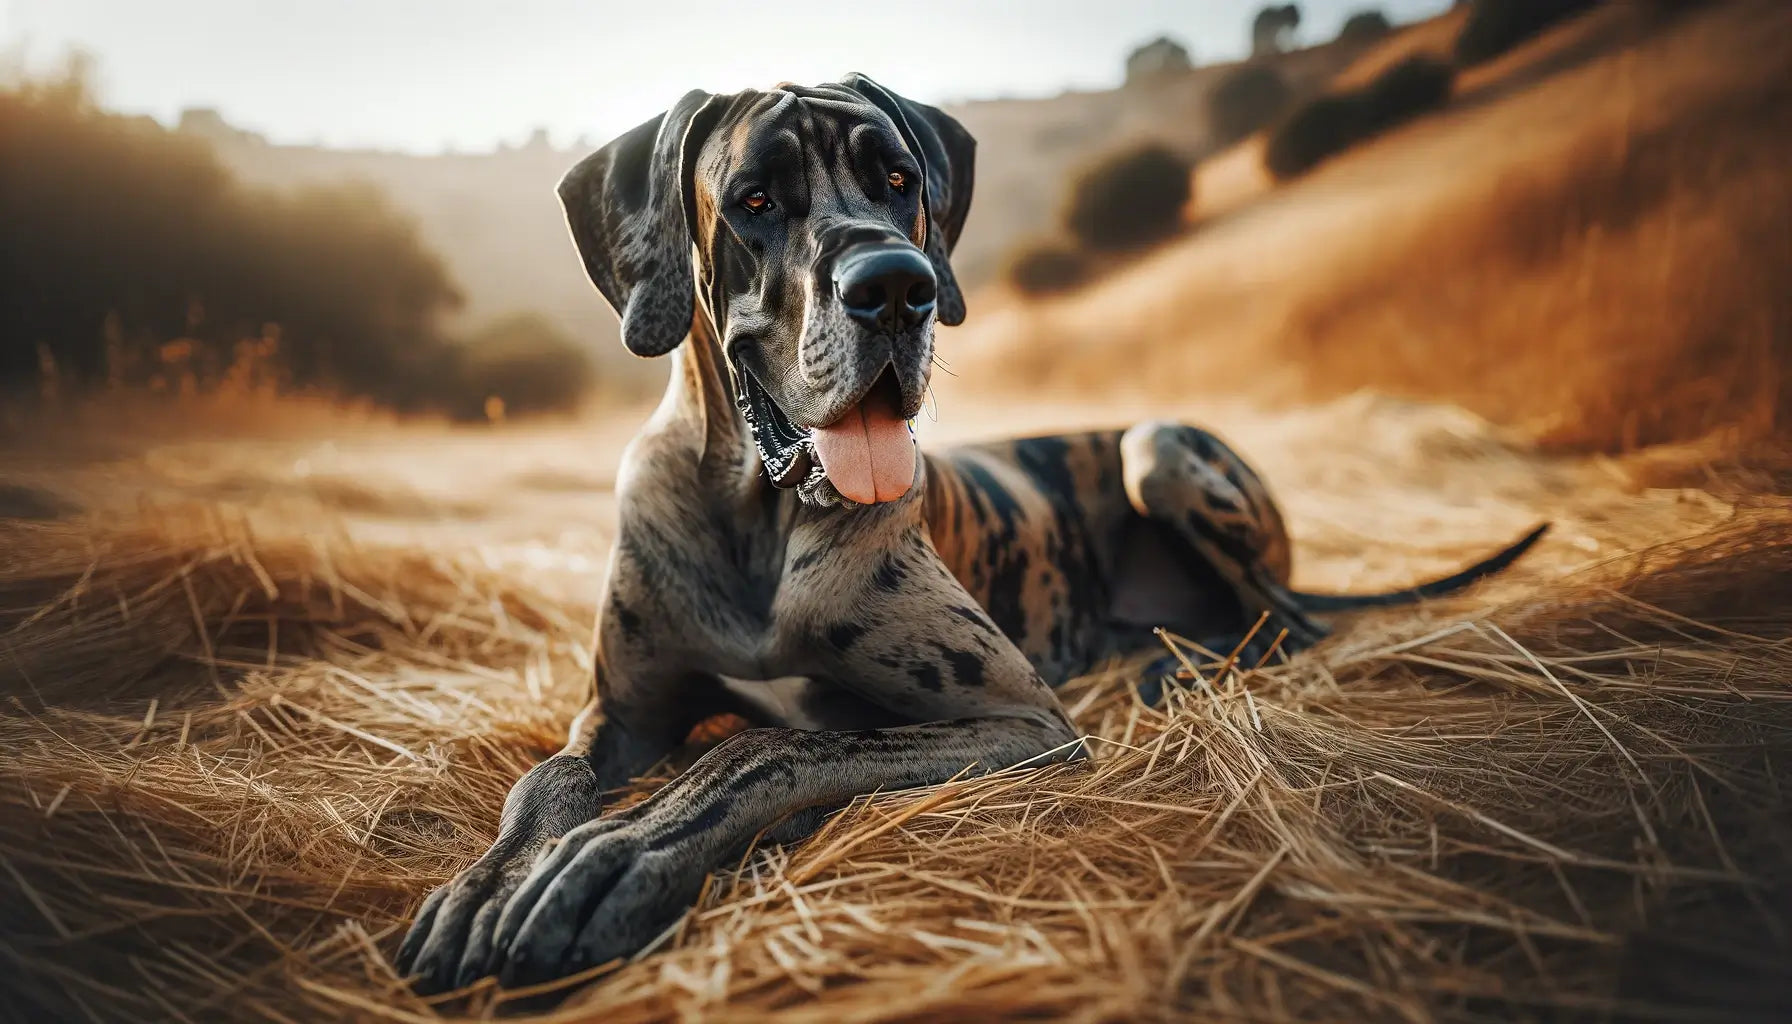 A Brindle Great Dane lying on dry grass, appearing content and at ease with its tongue out in a playful or restful moment.